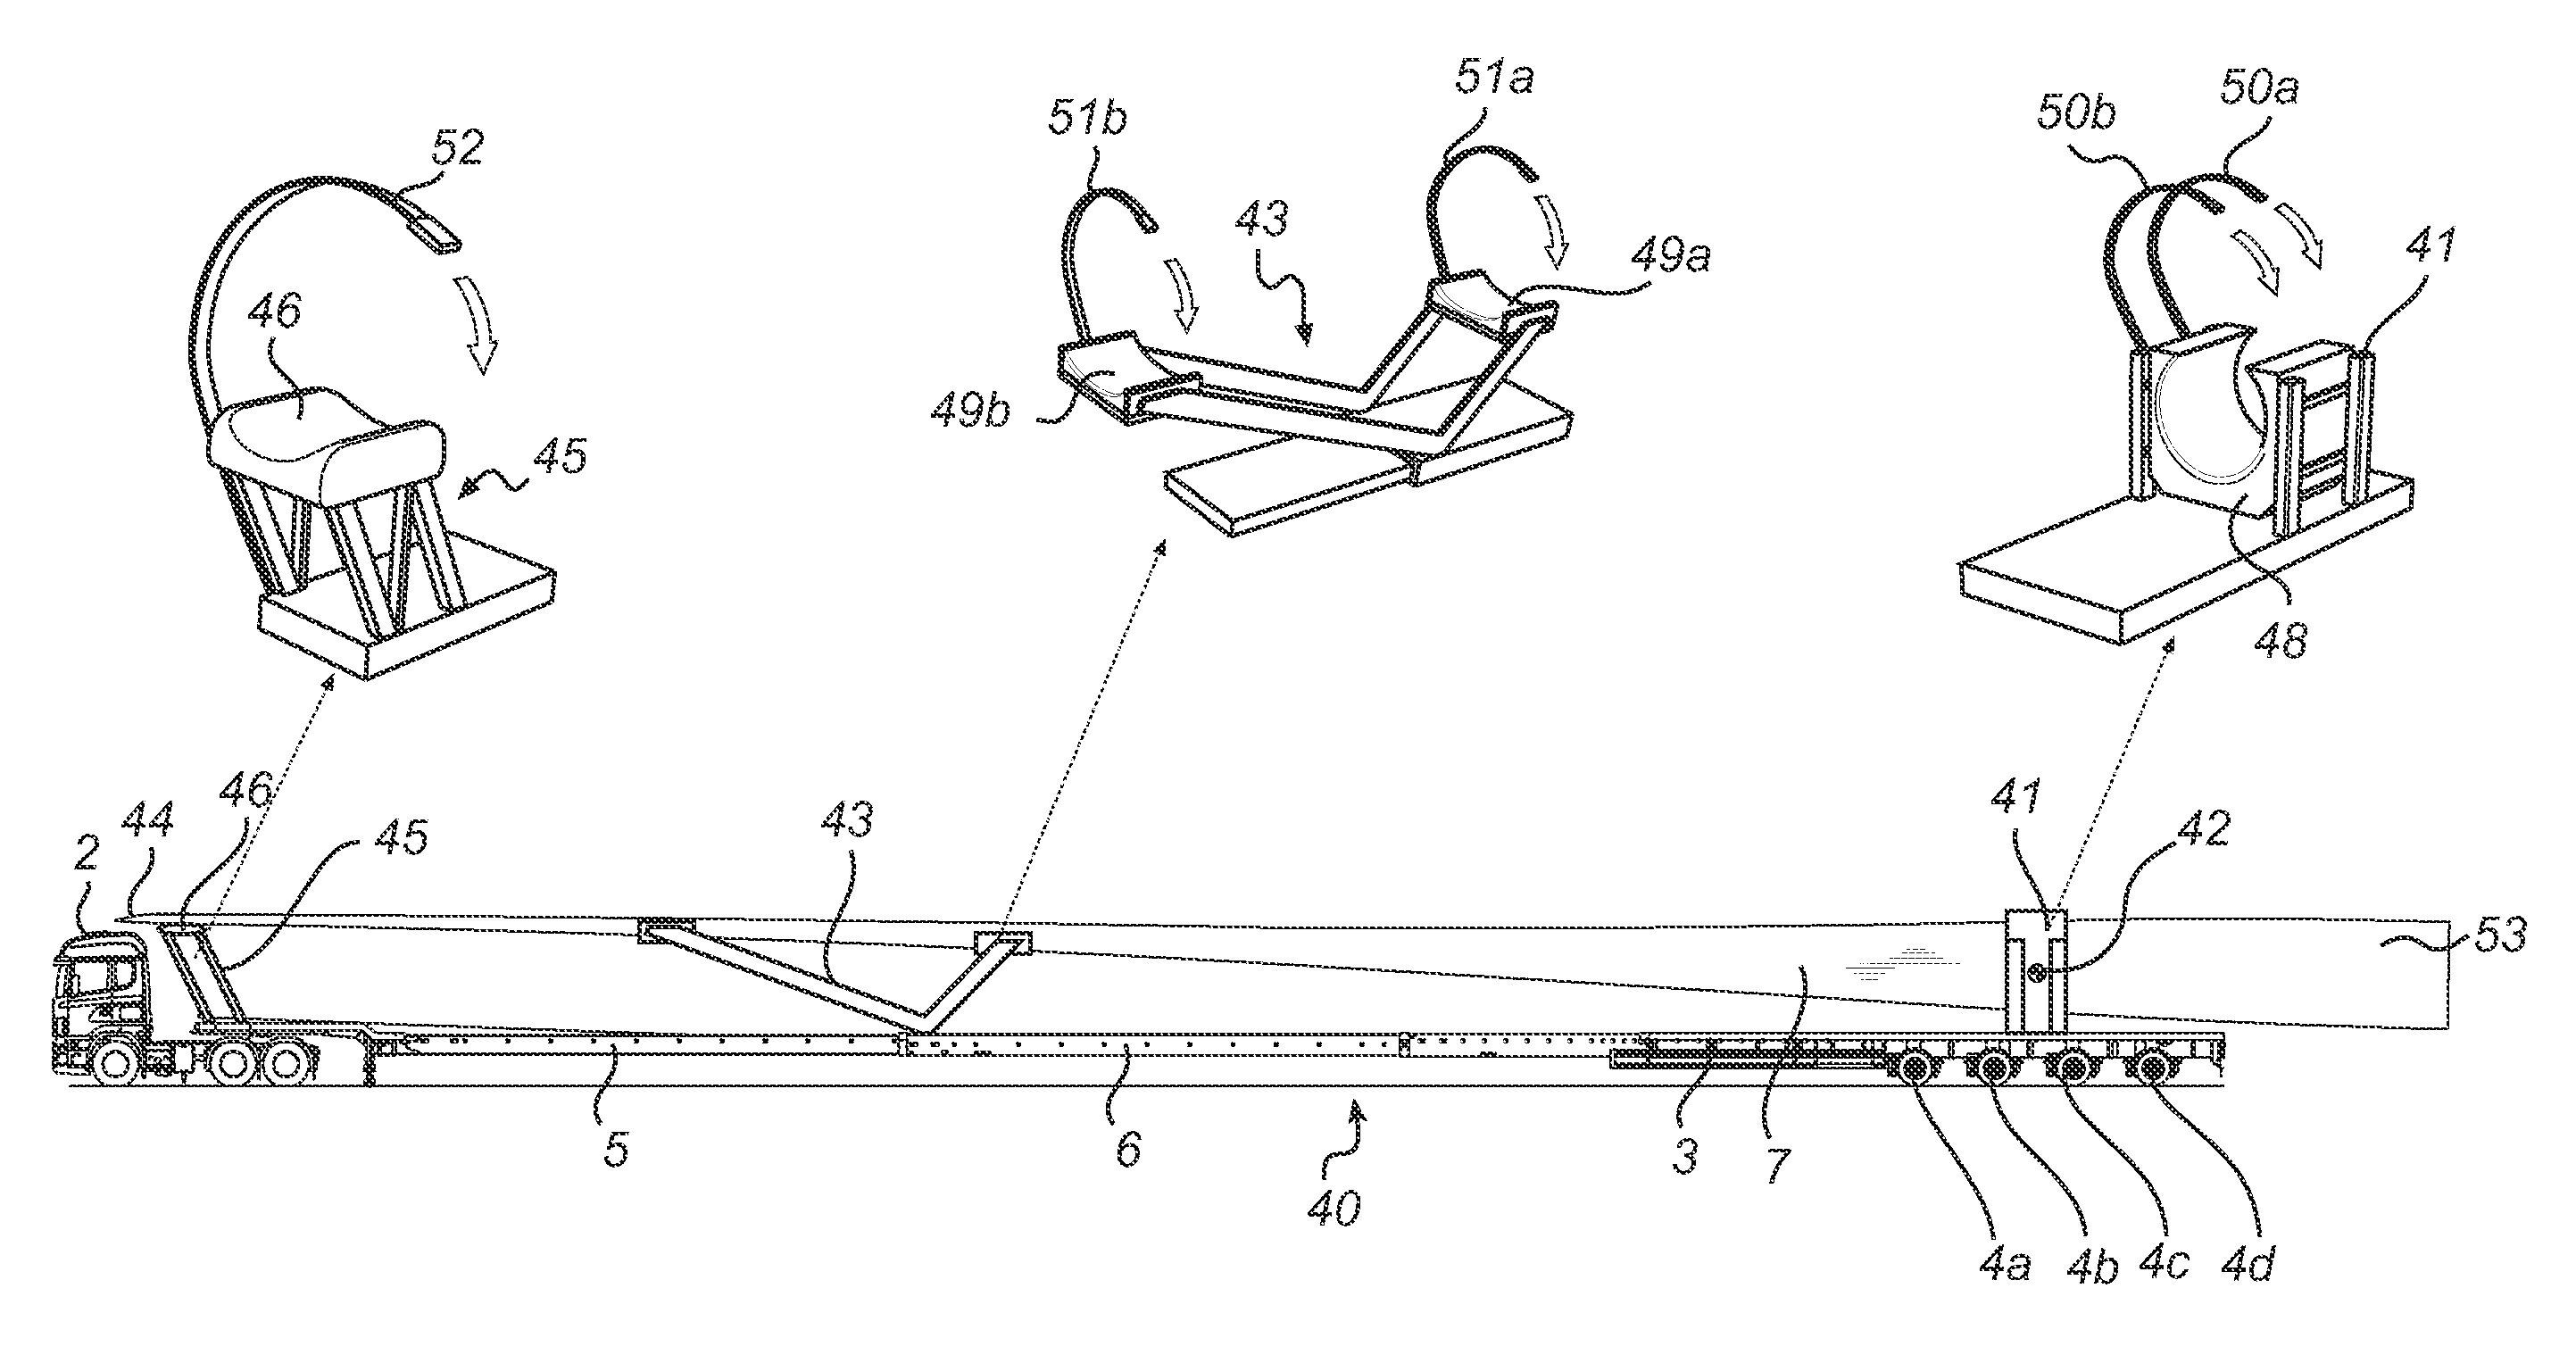 Telescopic vehicle and method for transporting a long object